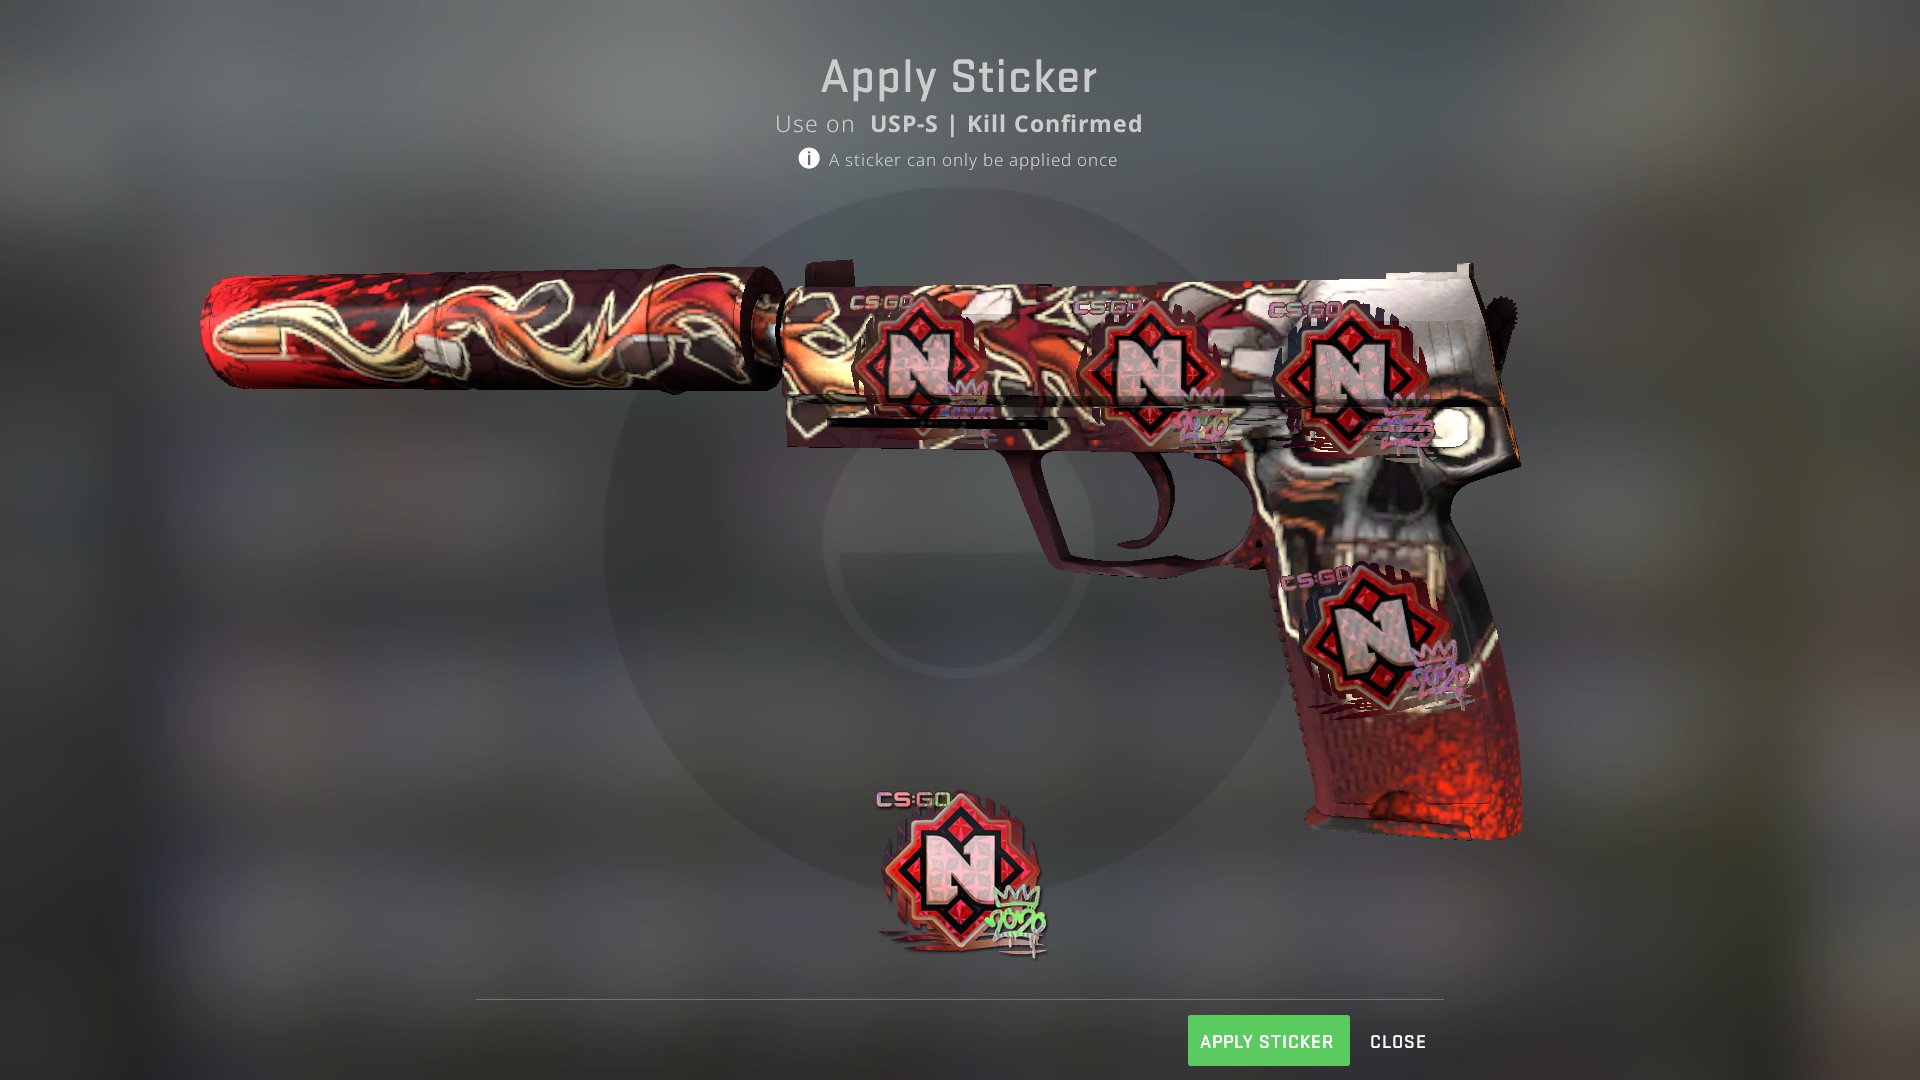 Cheap CS:GO Crafts on Twitter: "Decided to start a red loadout, so some crafts are coming soon. This is the first one USP-S Kill confirmed with 4 Nemiga holos. Looks pretty